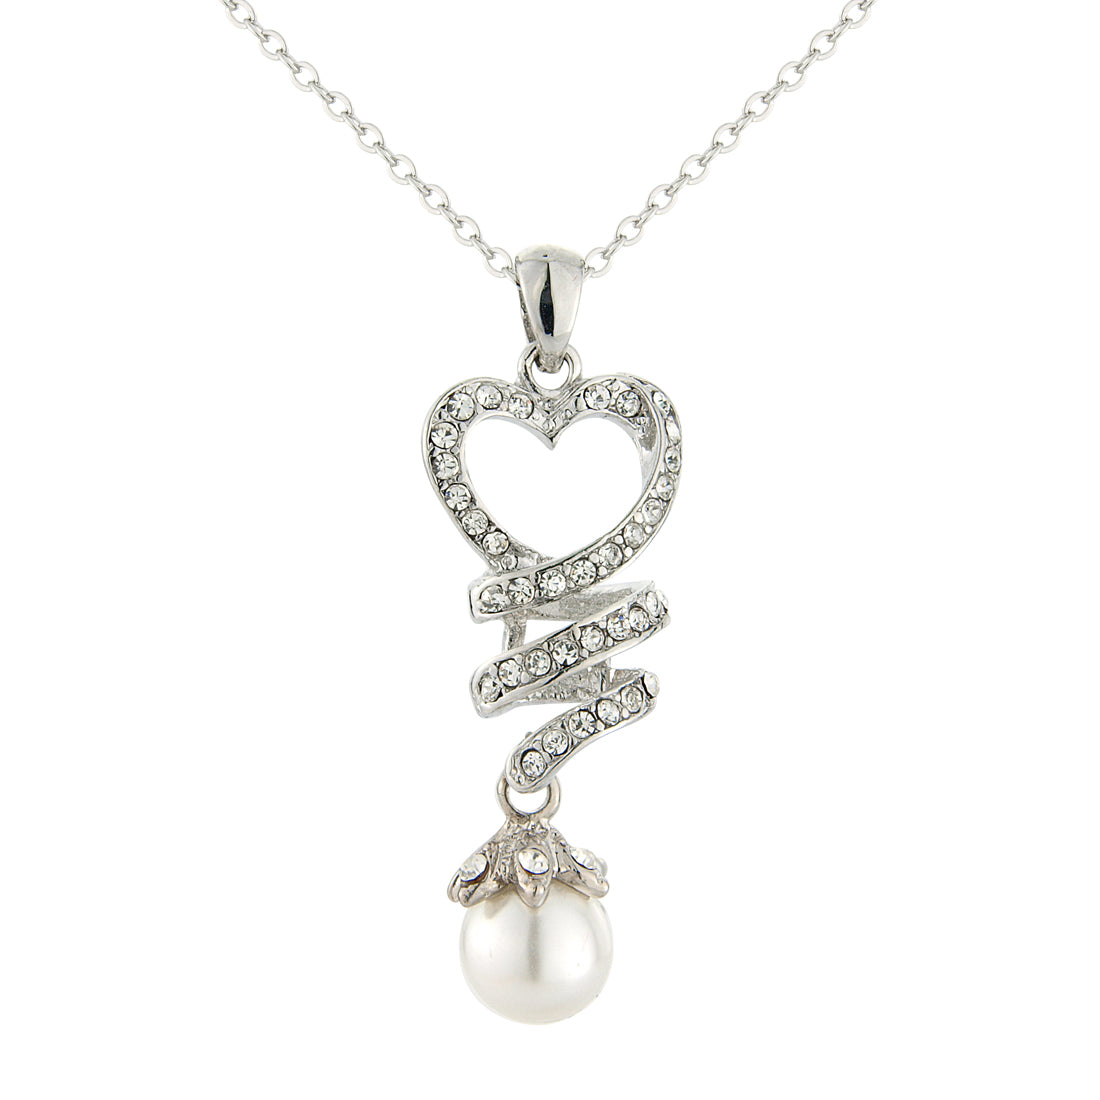 My Sweetheart Pearl Drop Pendant Necklace